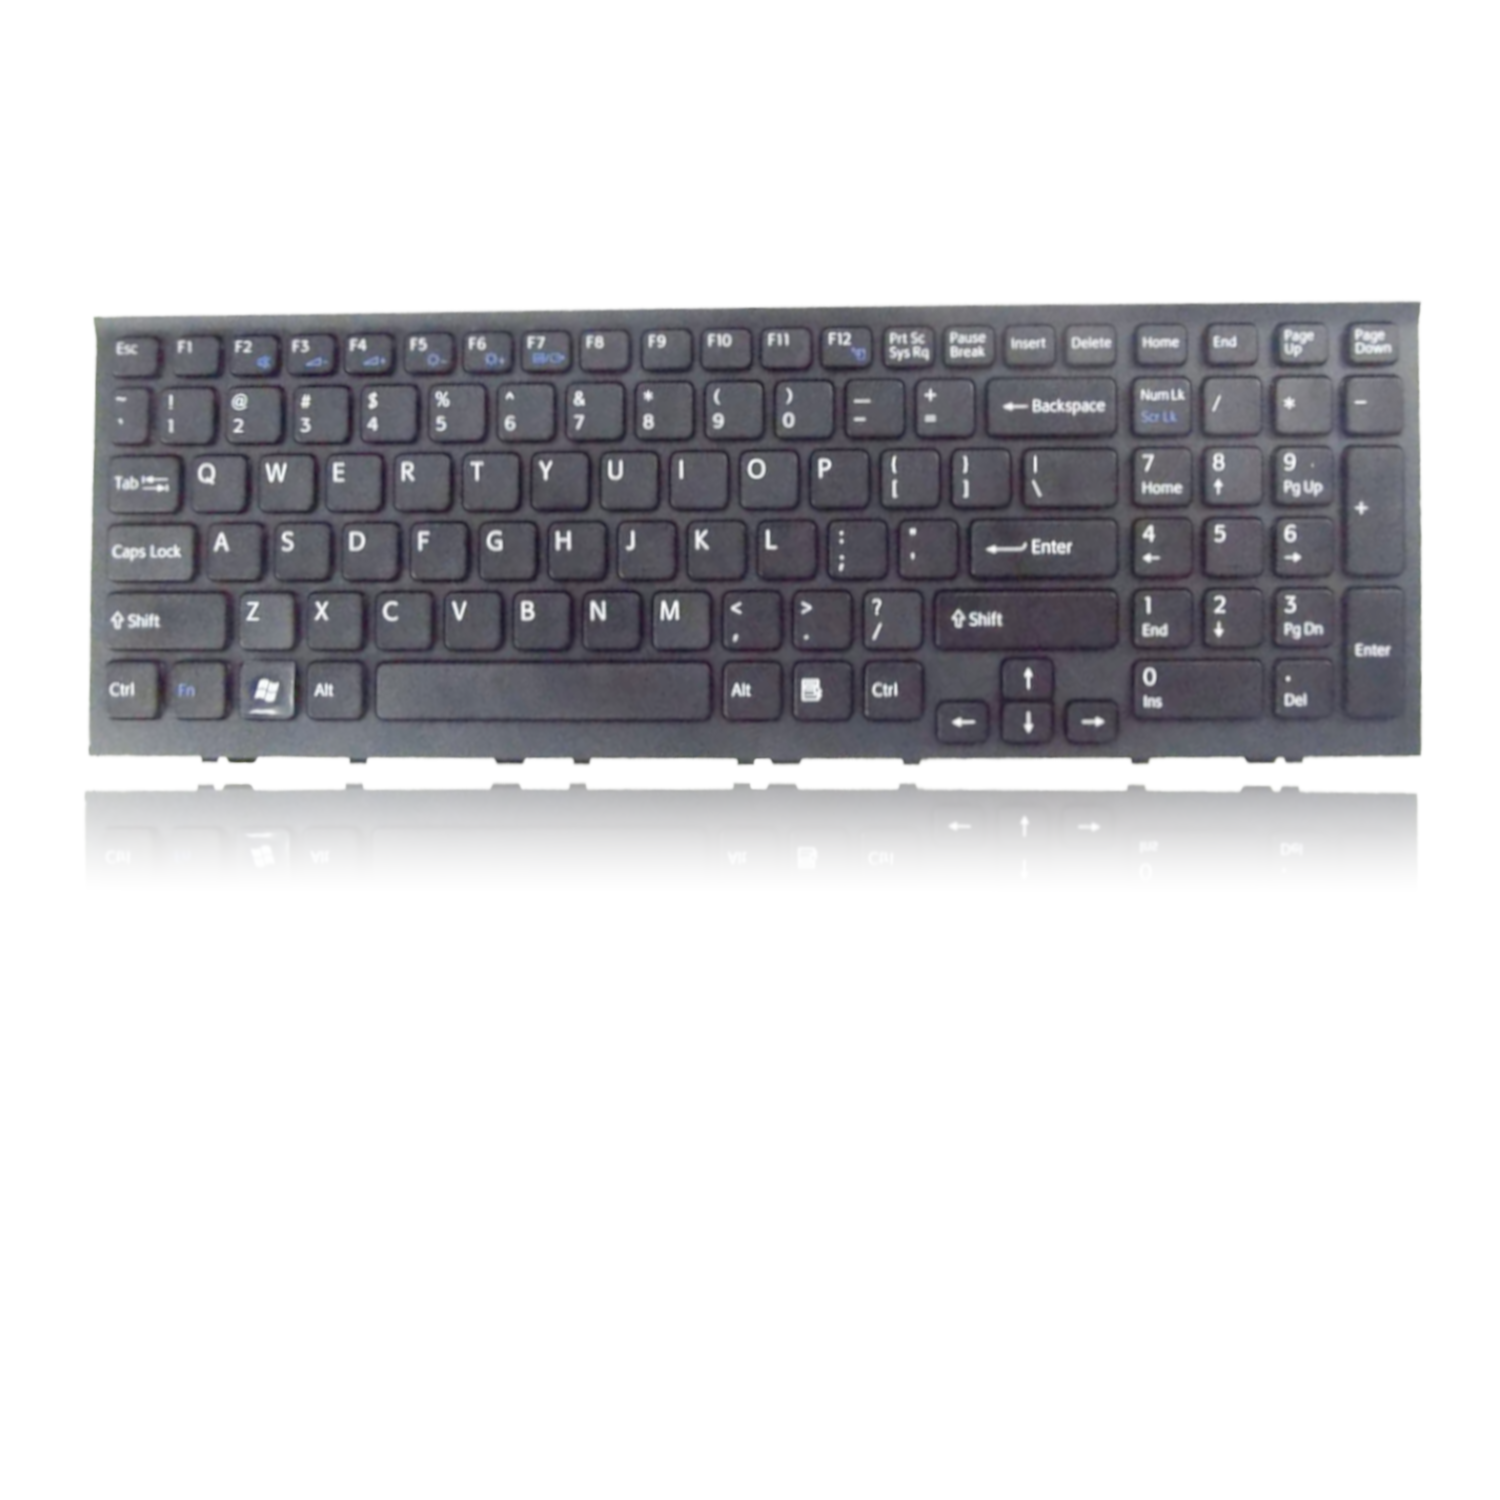 Keyboard for Sony Vaio VPC-EE